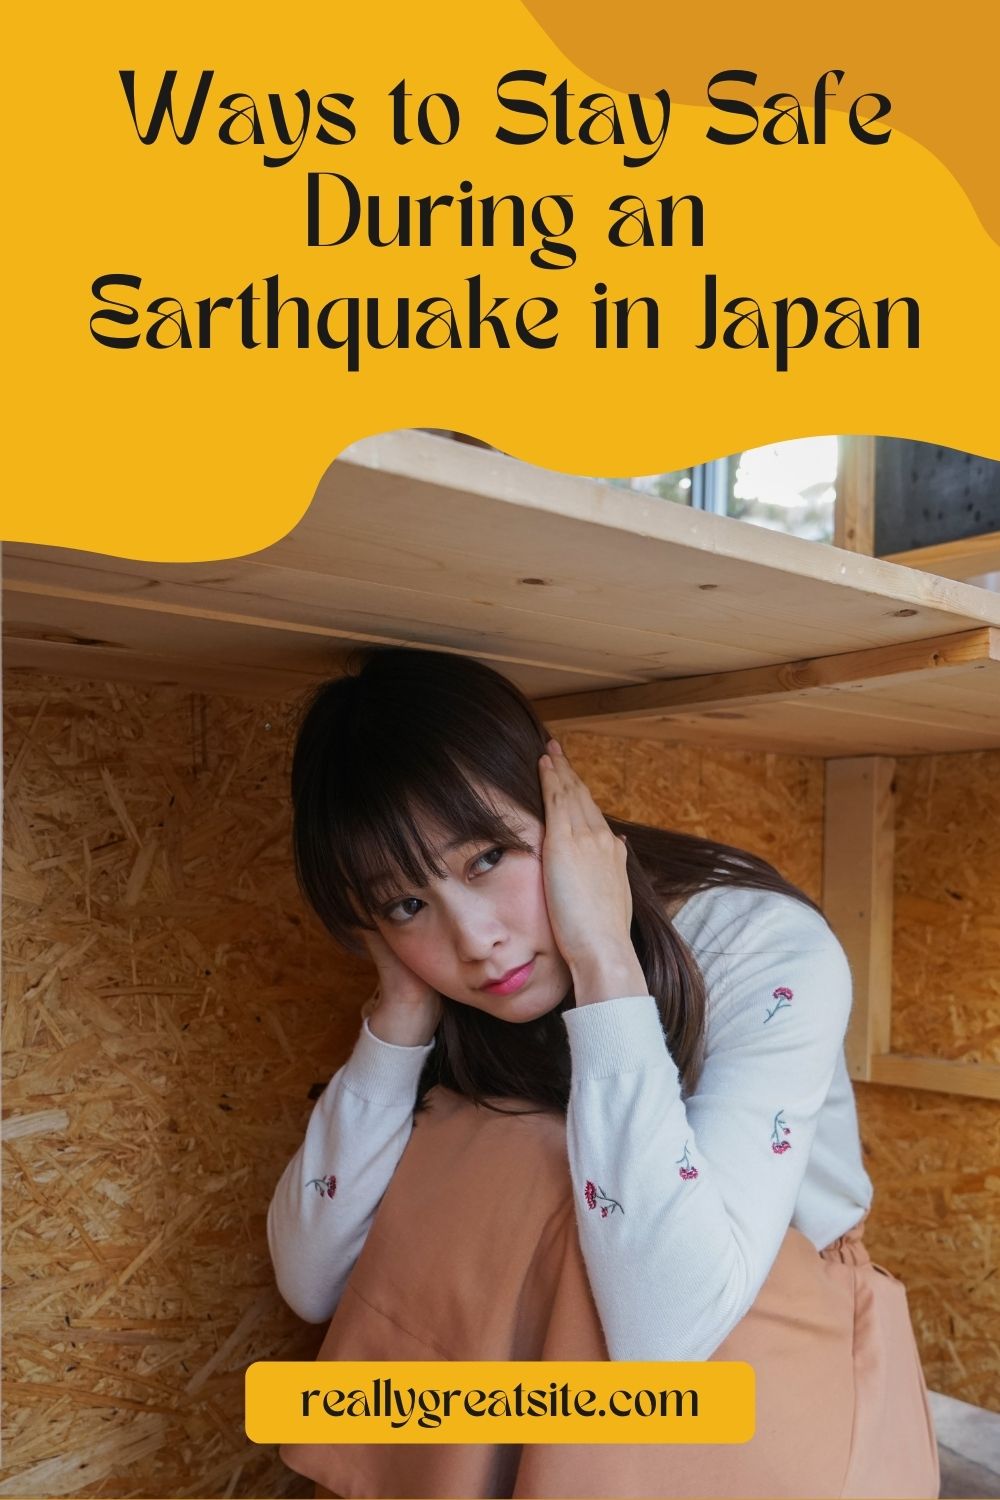 Lady Under A Desk During An Earthquake PIN.